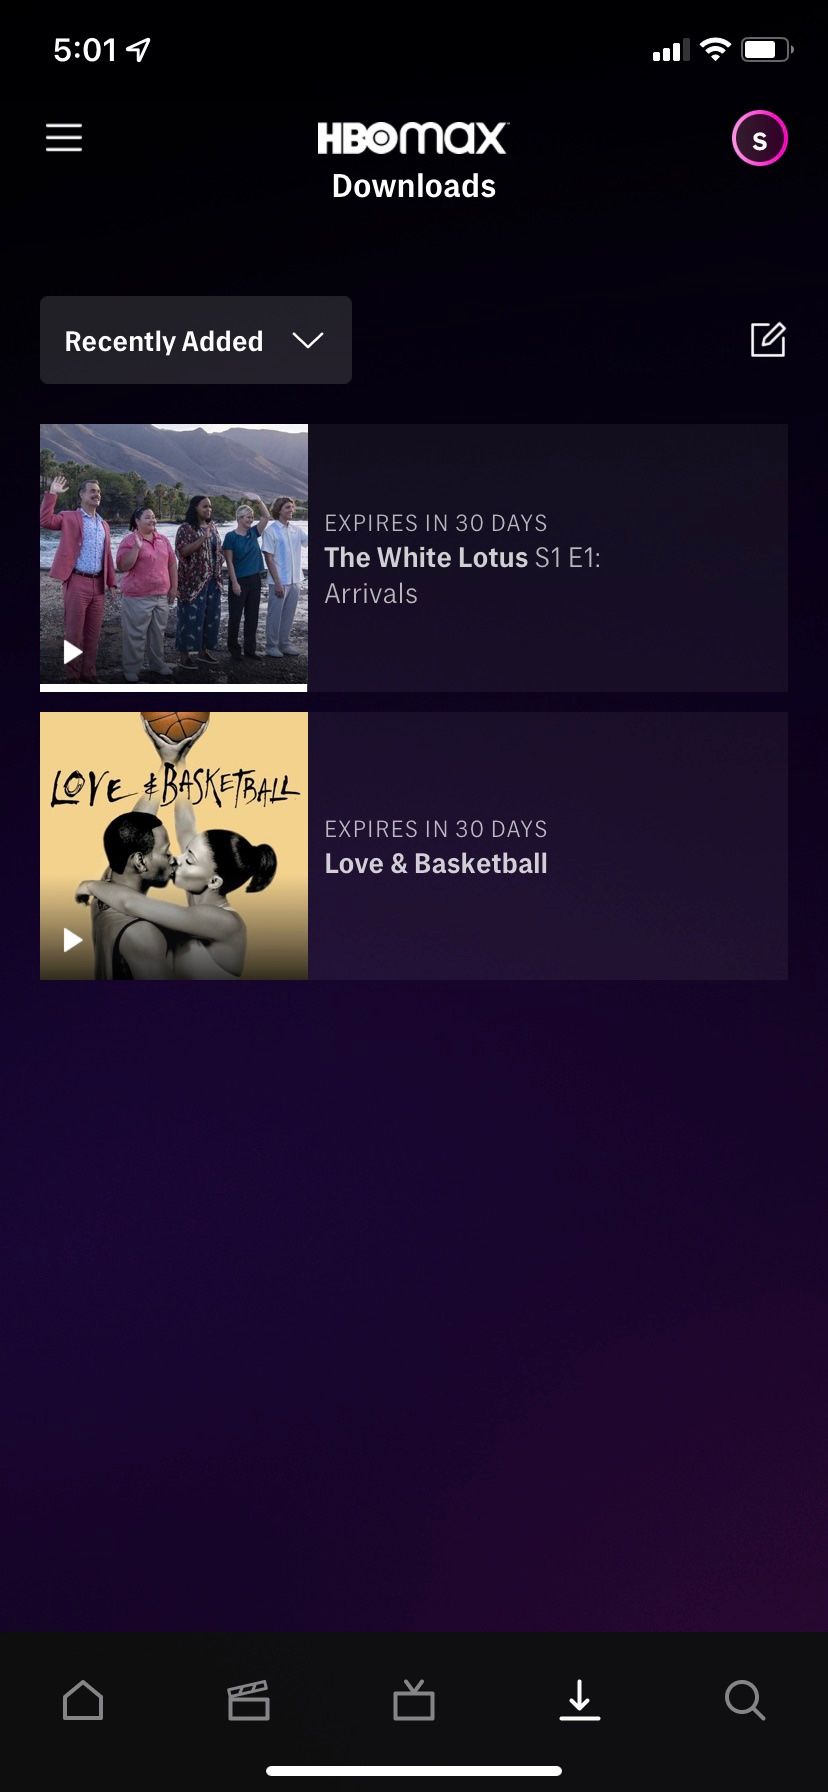 Screenshot of new HBO Max downloads page